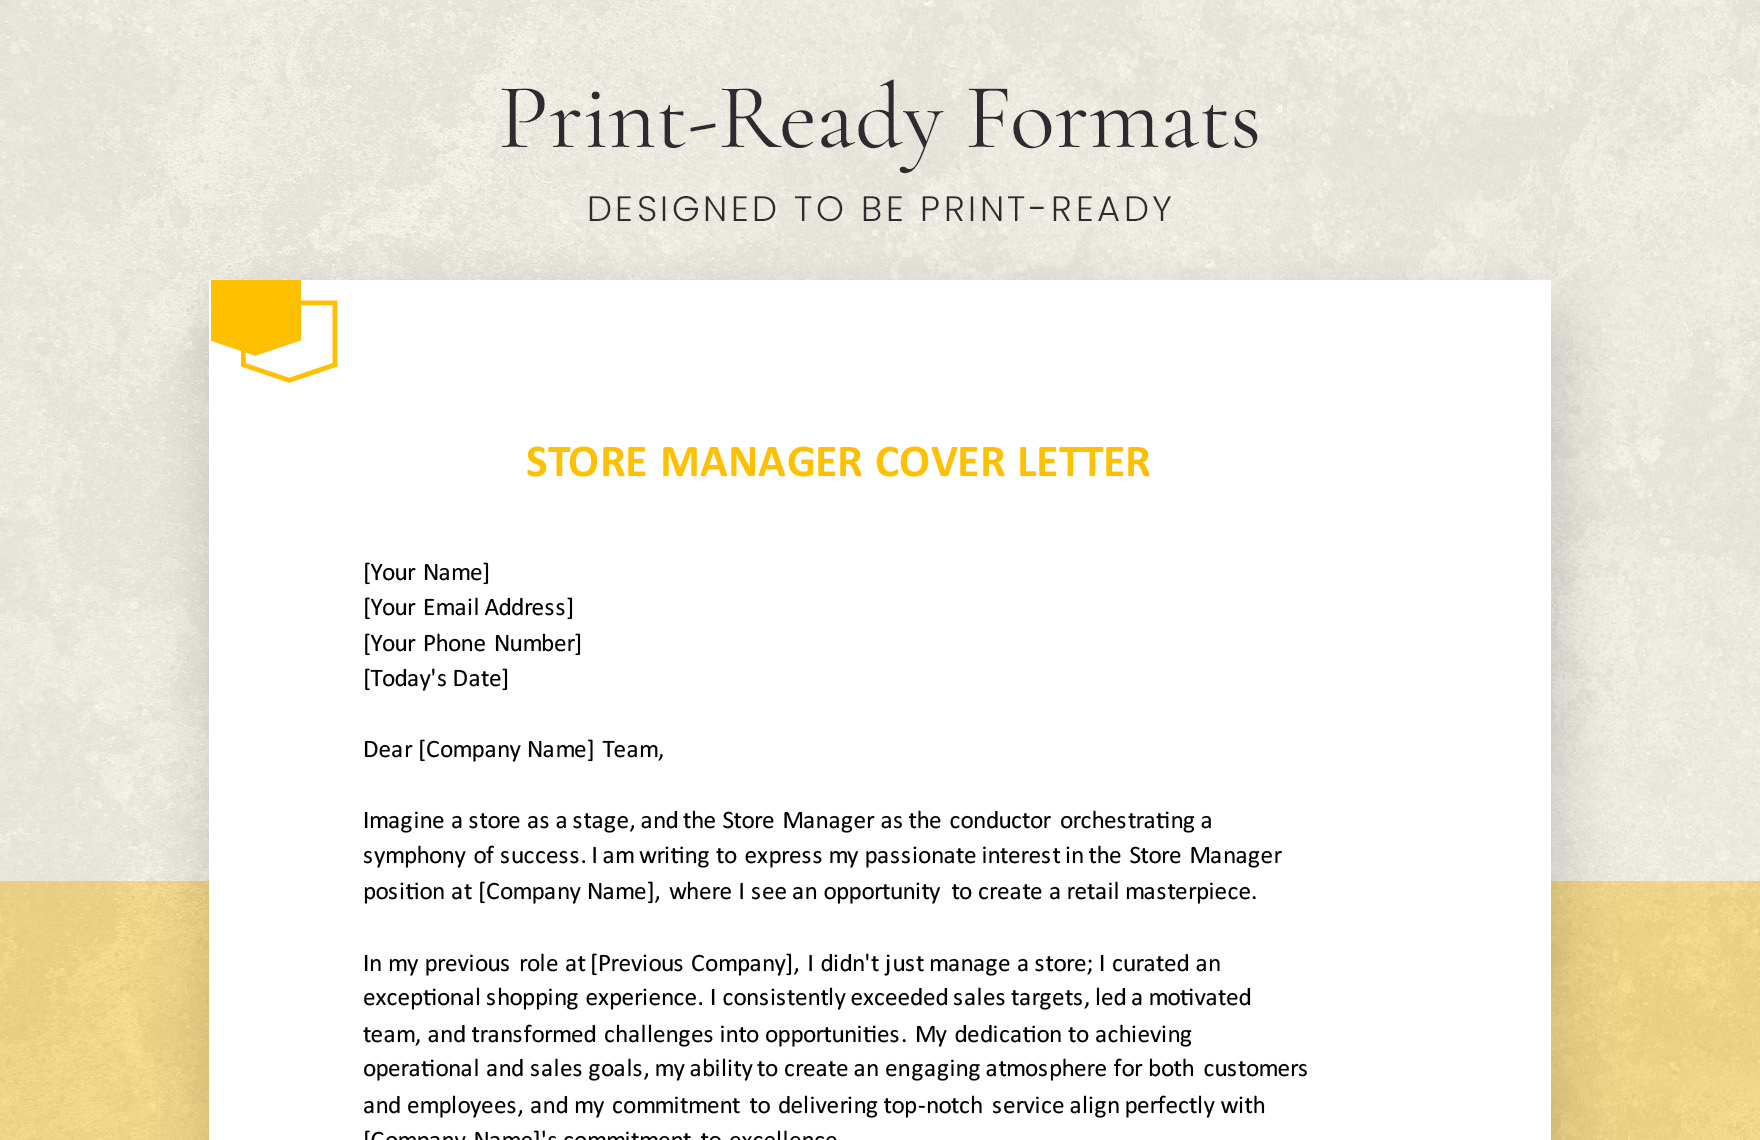 Store Manager Cover Letter